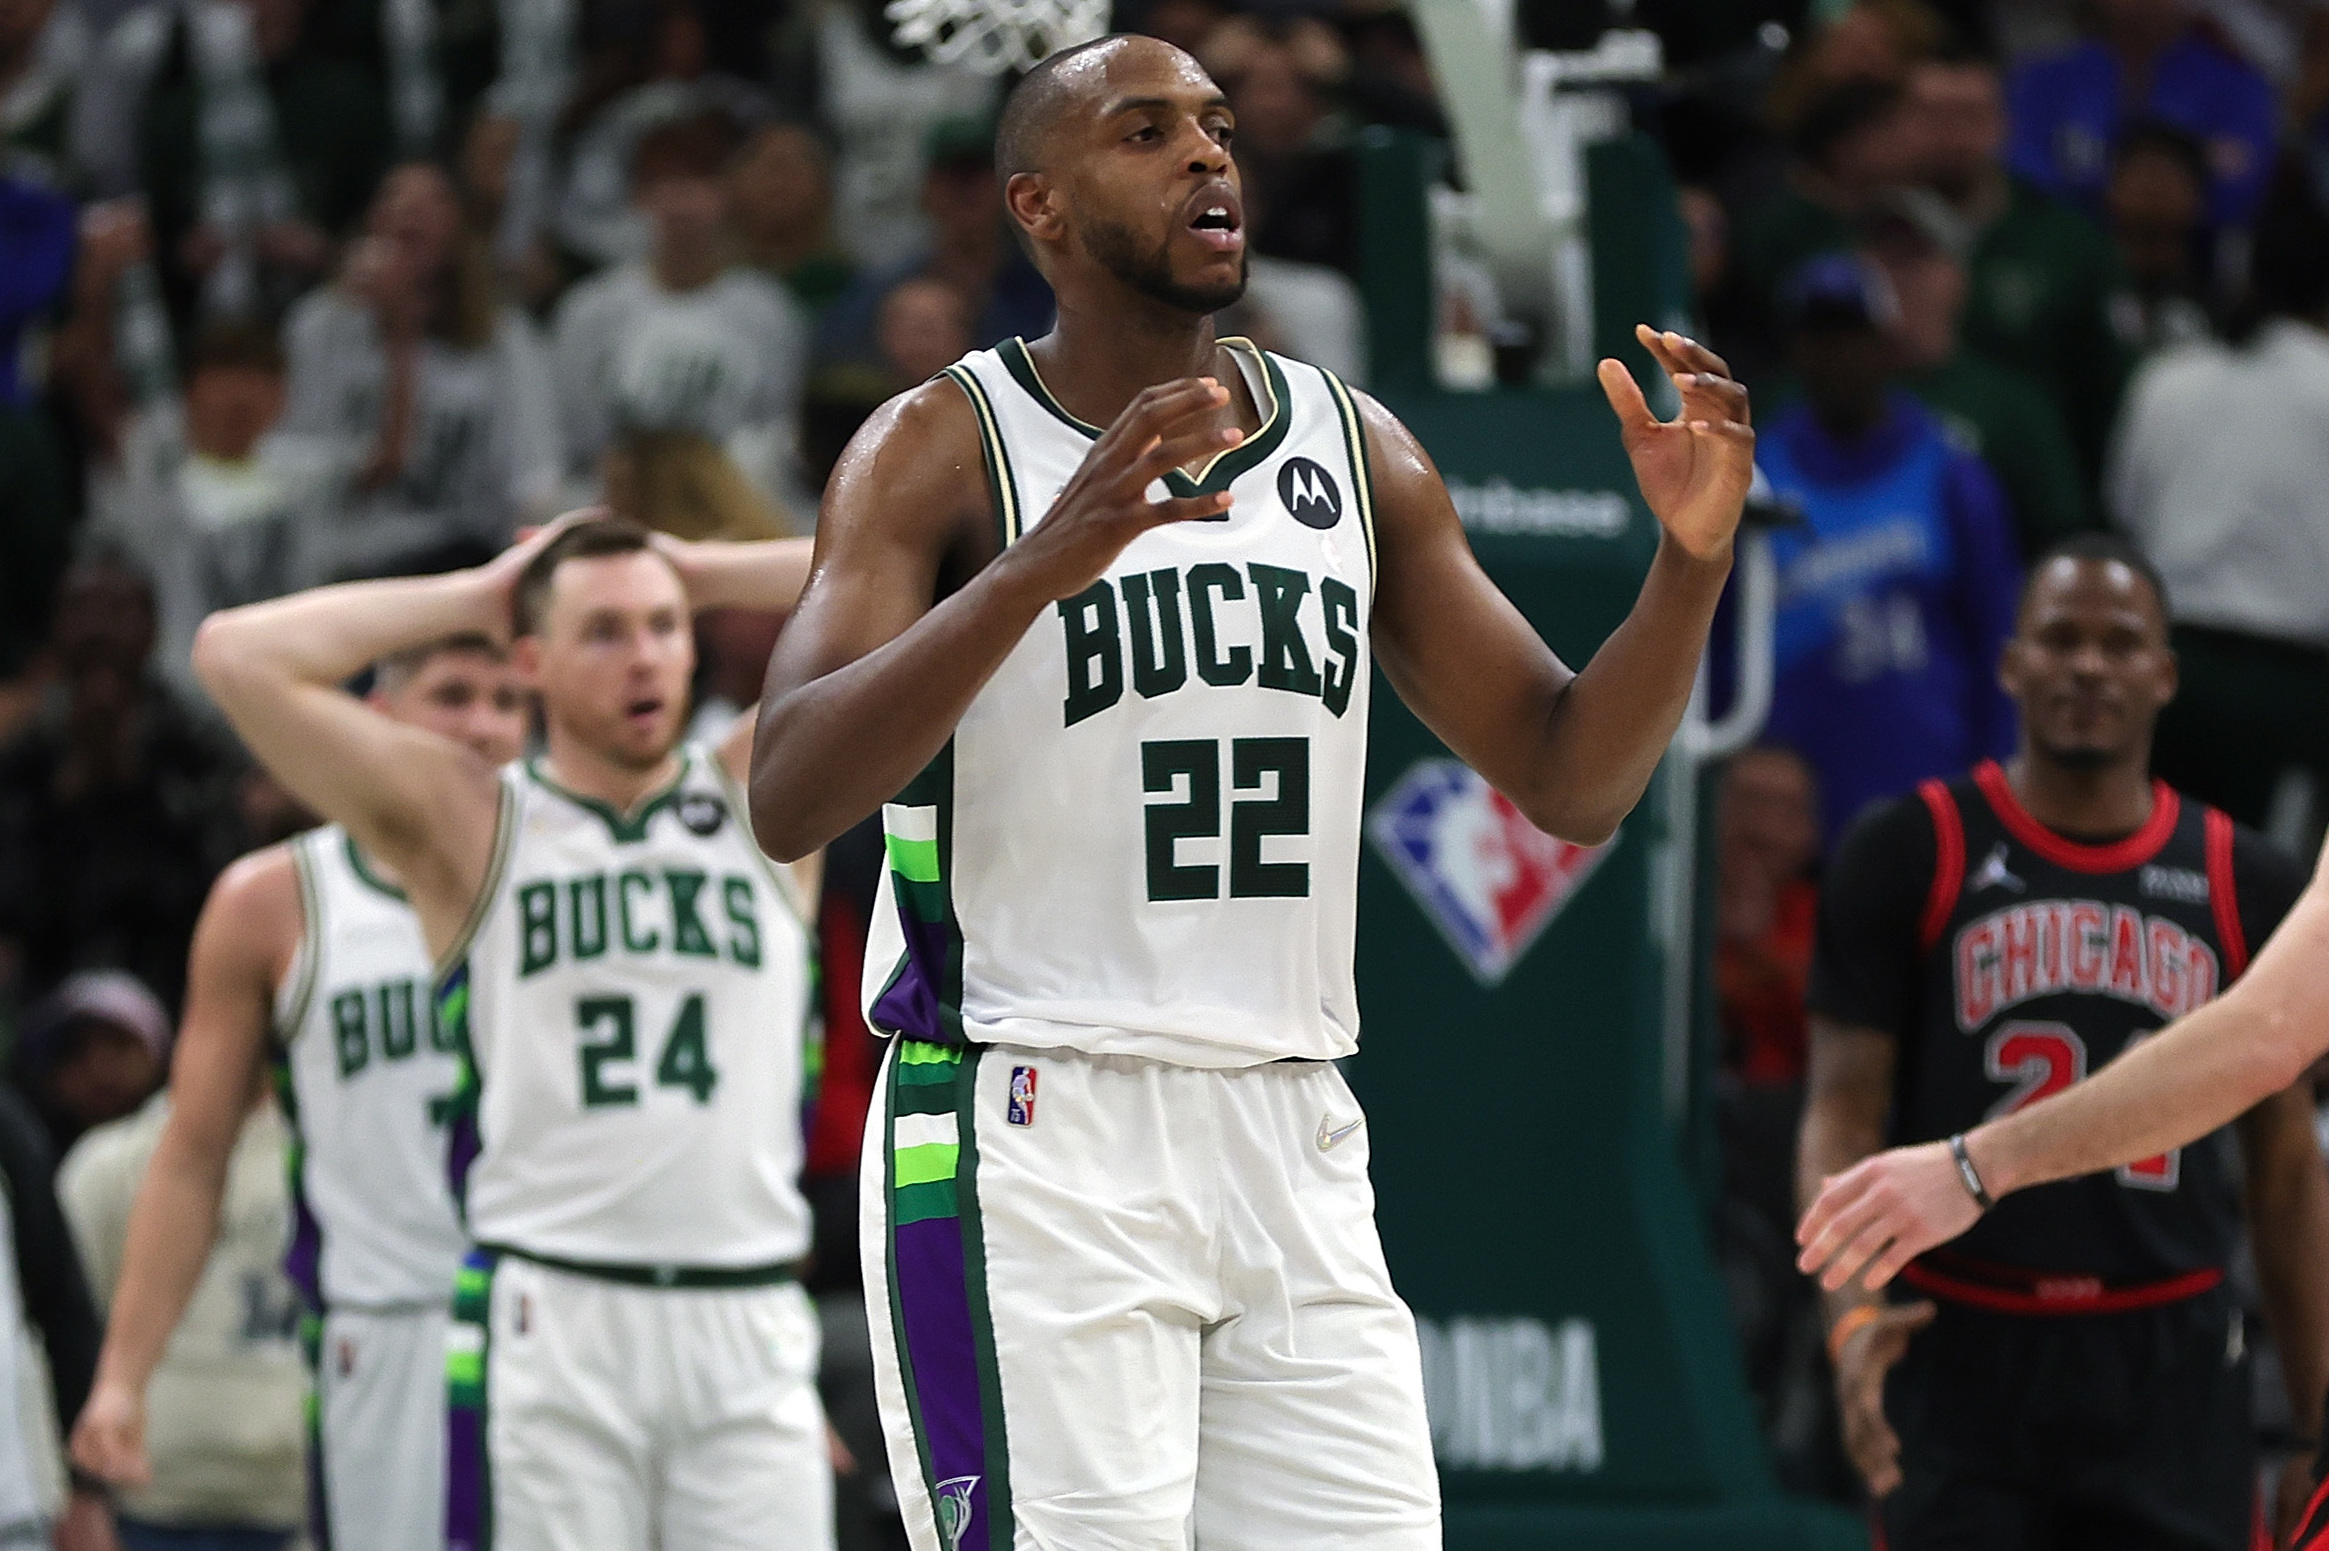 Bucks All-Star Khris Middleton declines $40M option, will become free agent